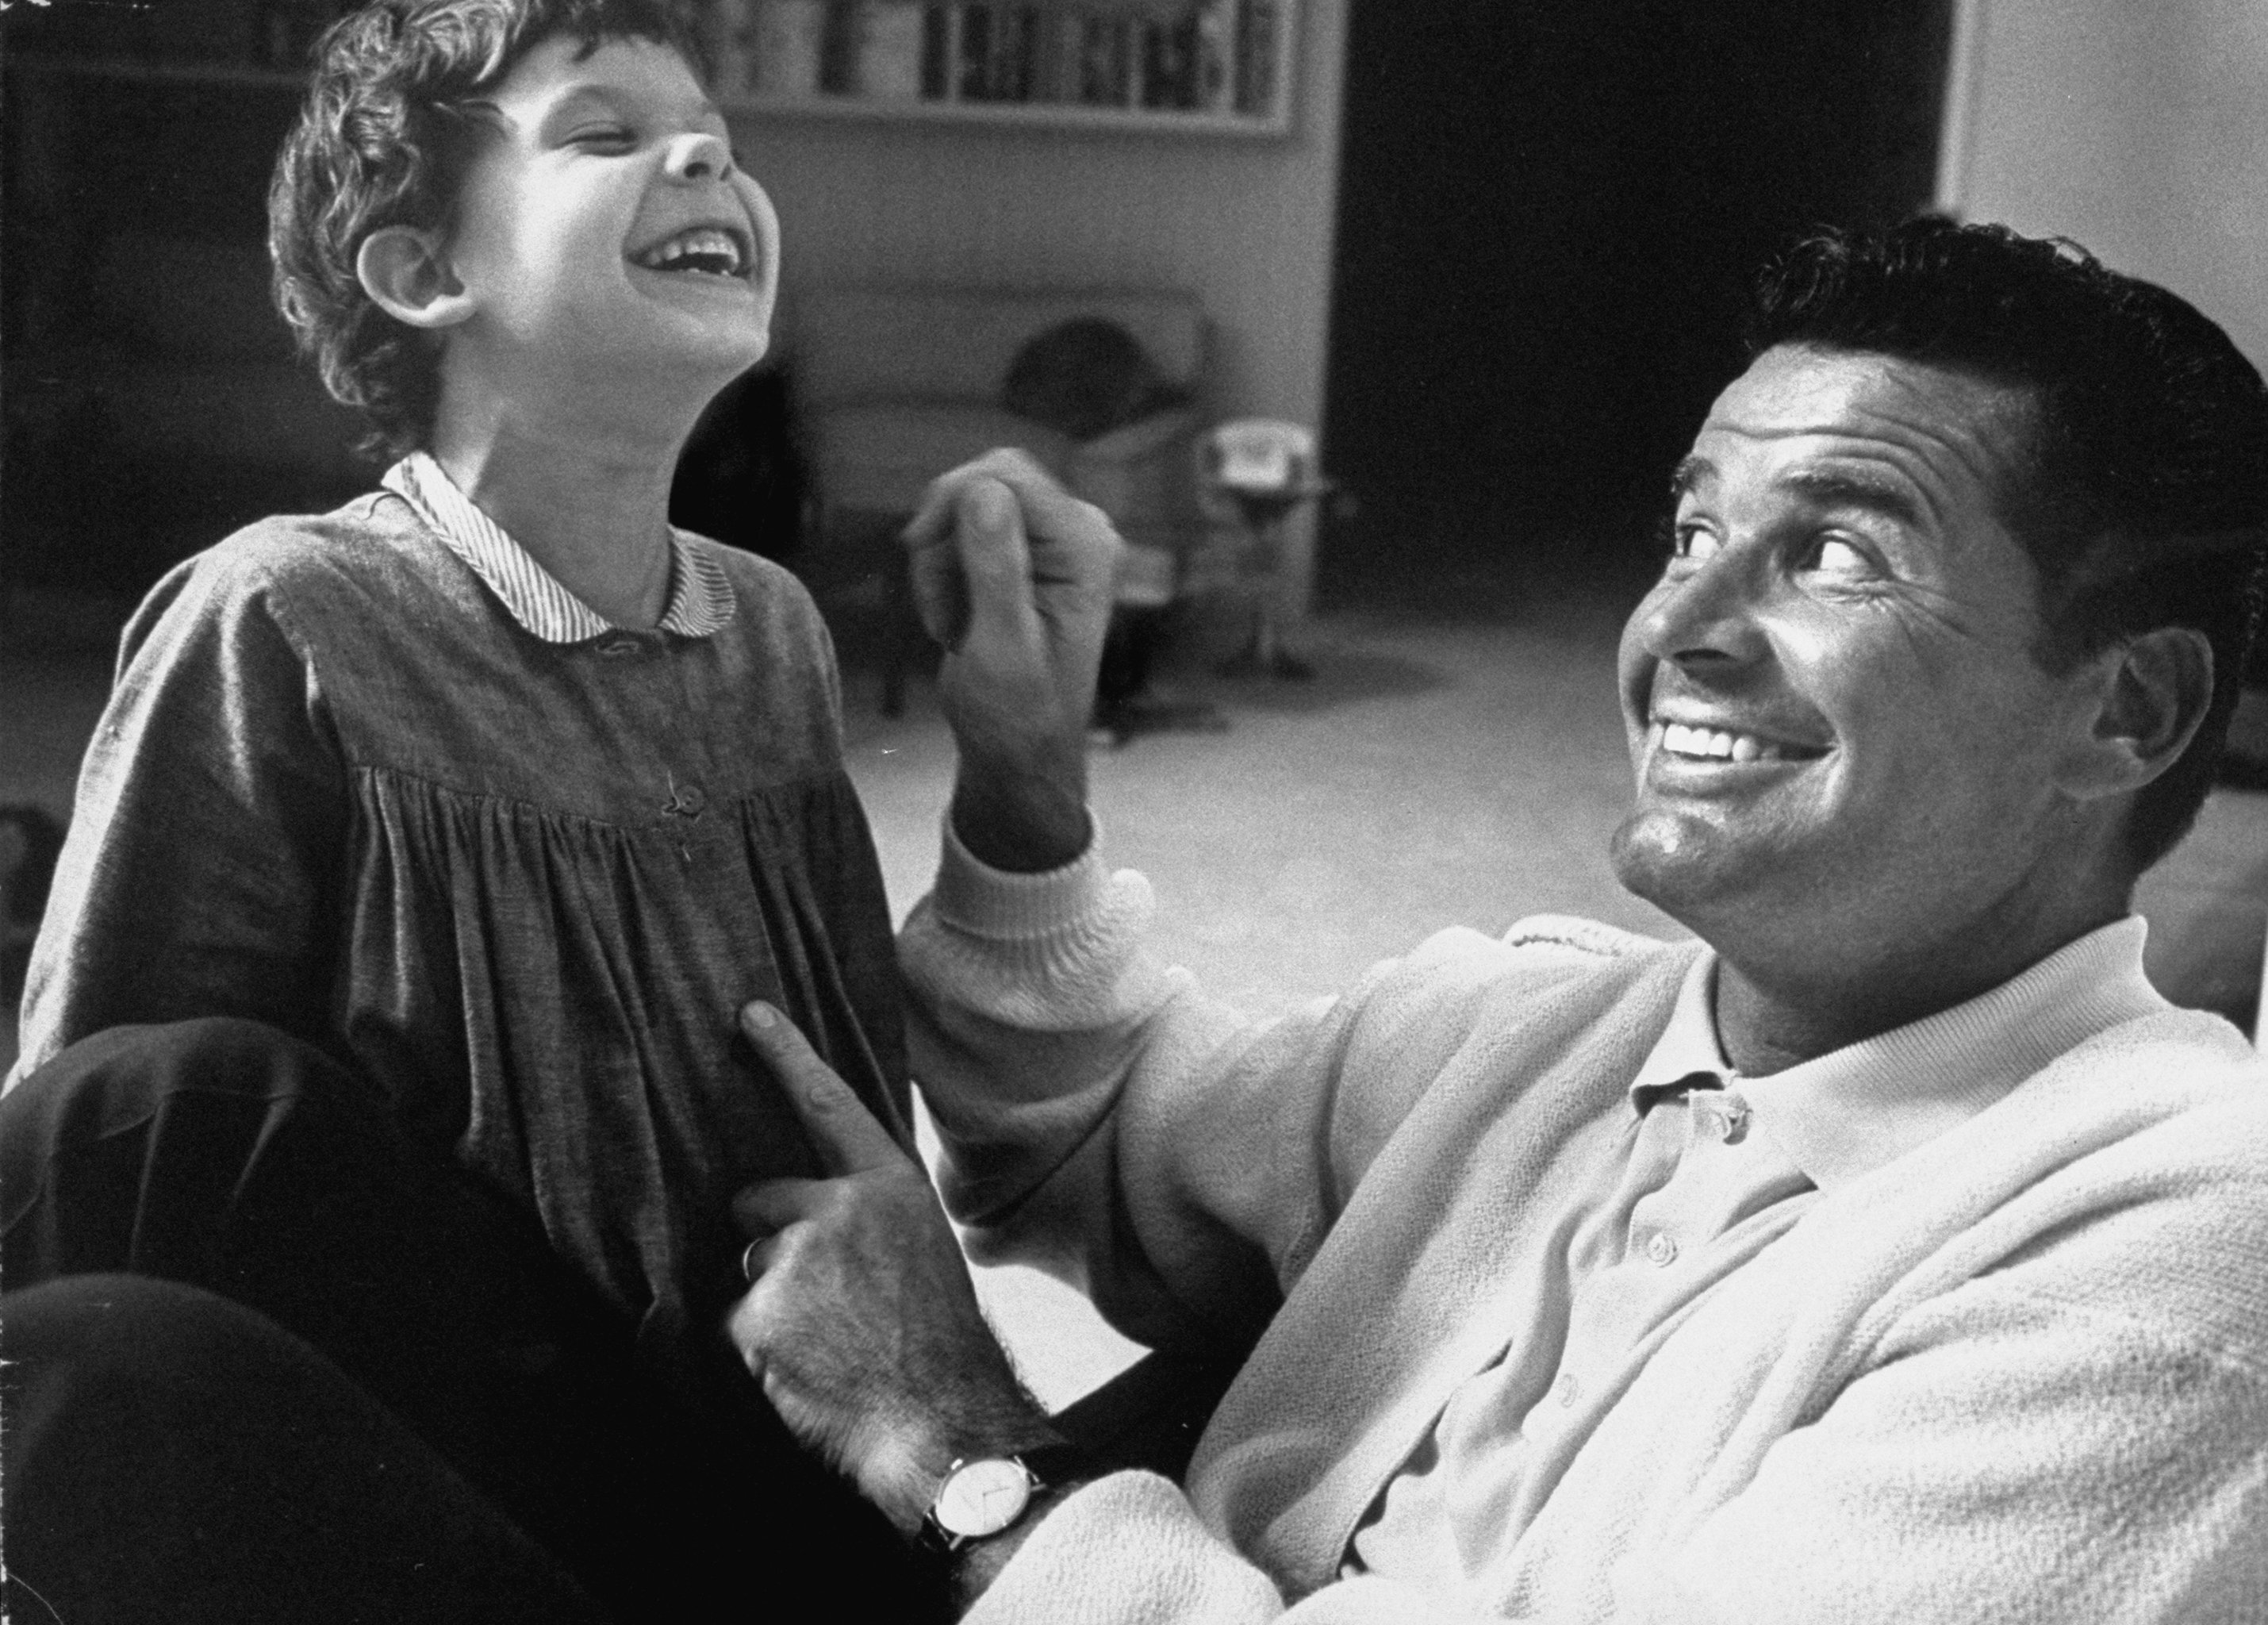 James Garner relaxing with his daughter at home. | Source: Getty Images